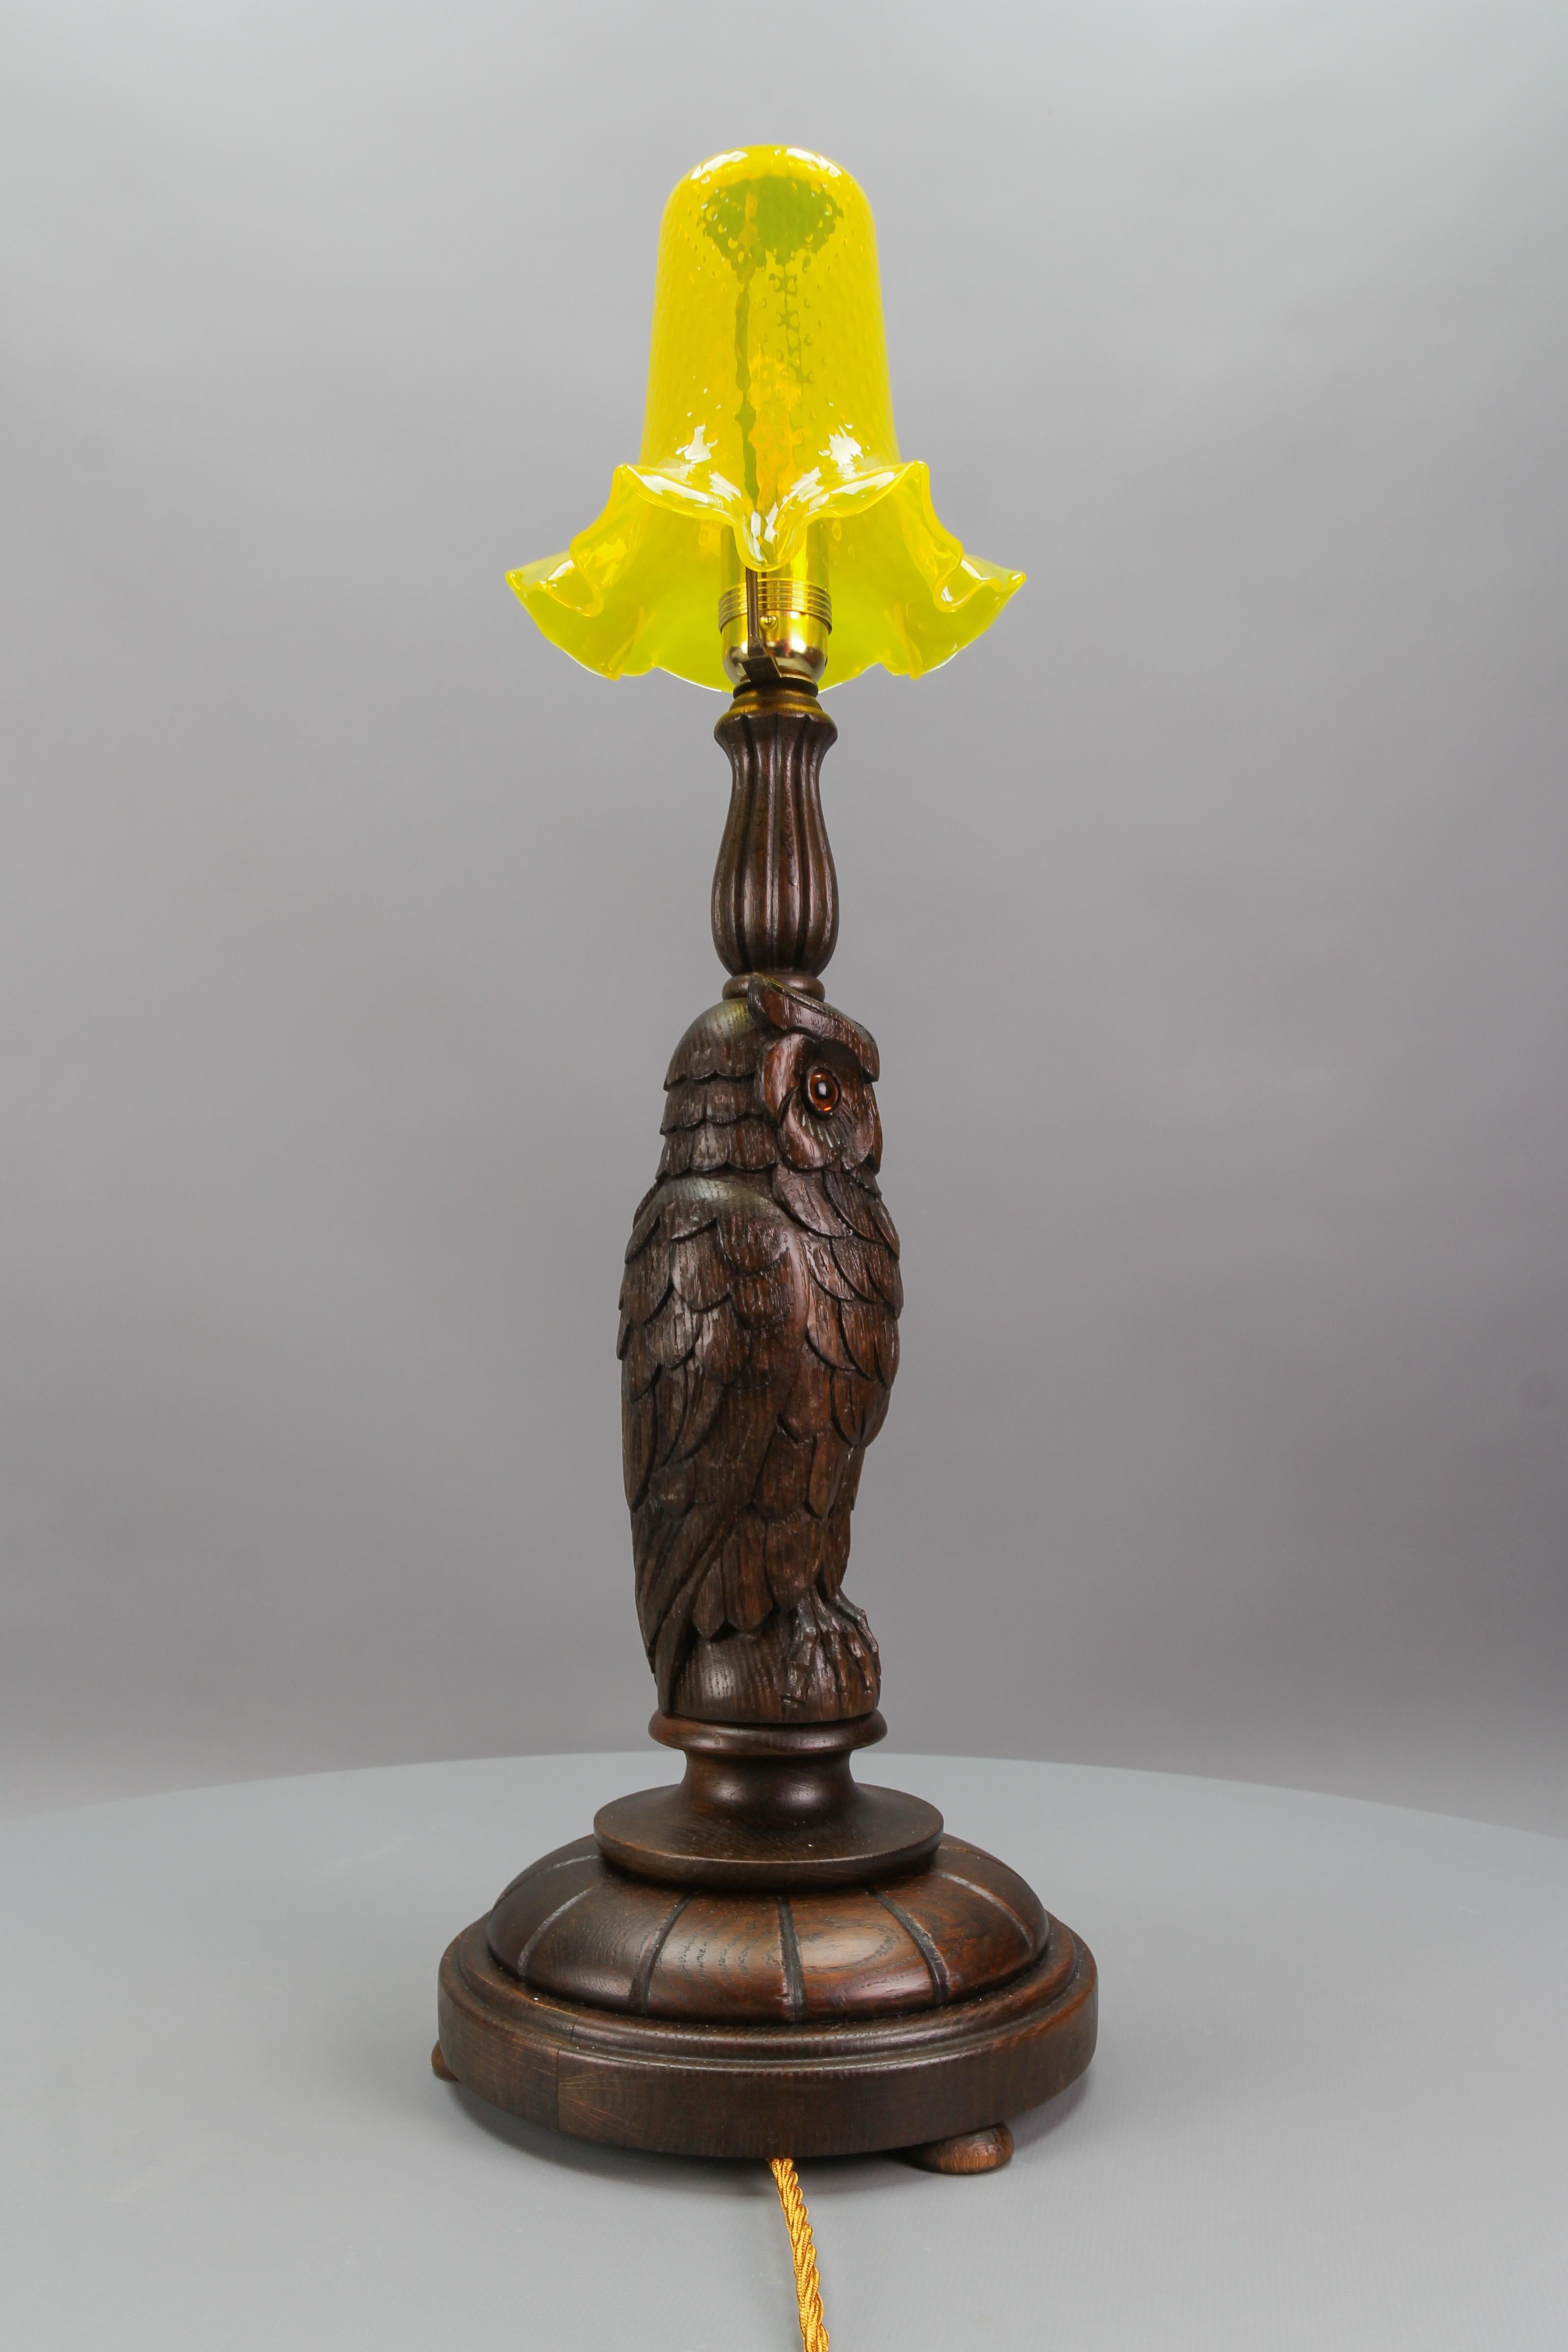 Art Deco Table Lamp with Owl Sculpture and Yellow Glass Lampshade, ca. 1920 For Sale 6